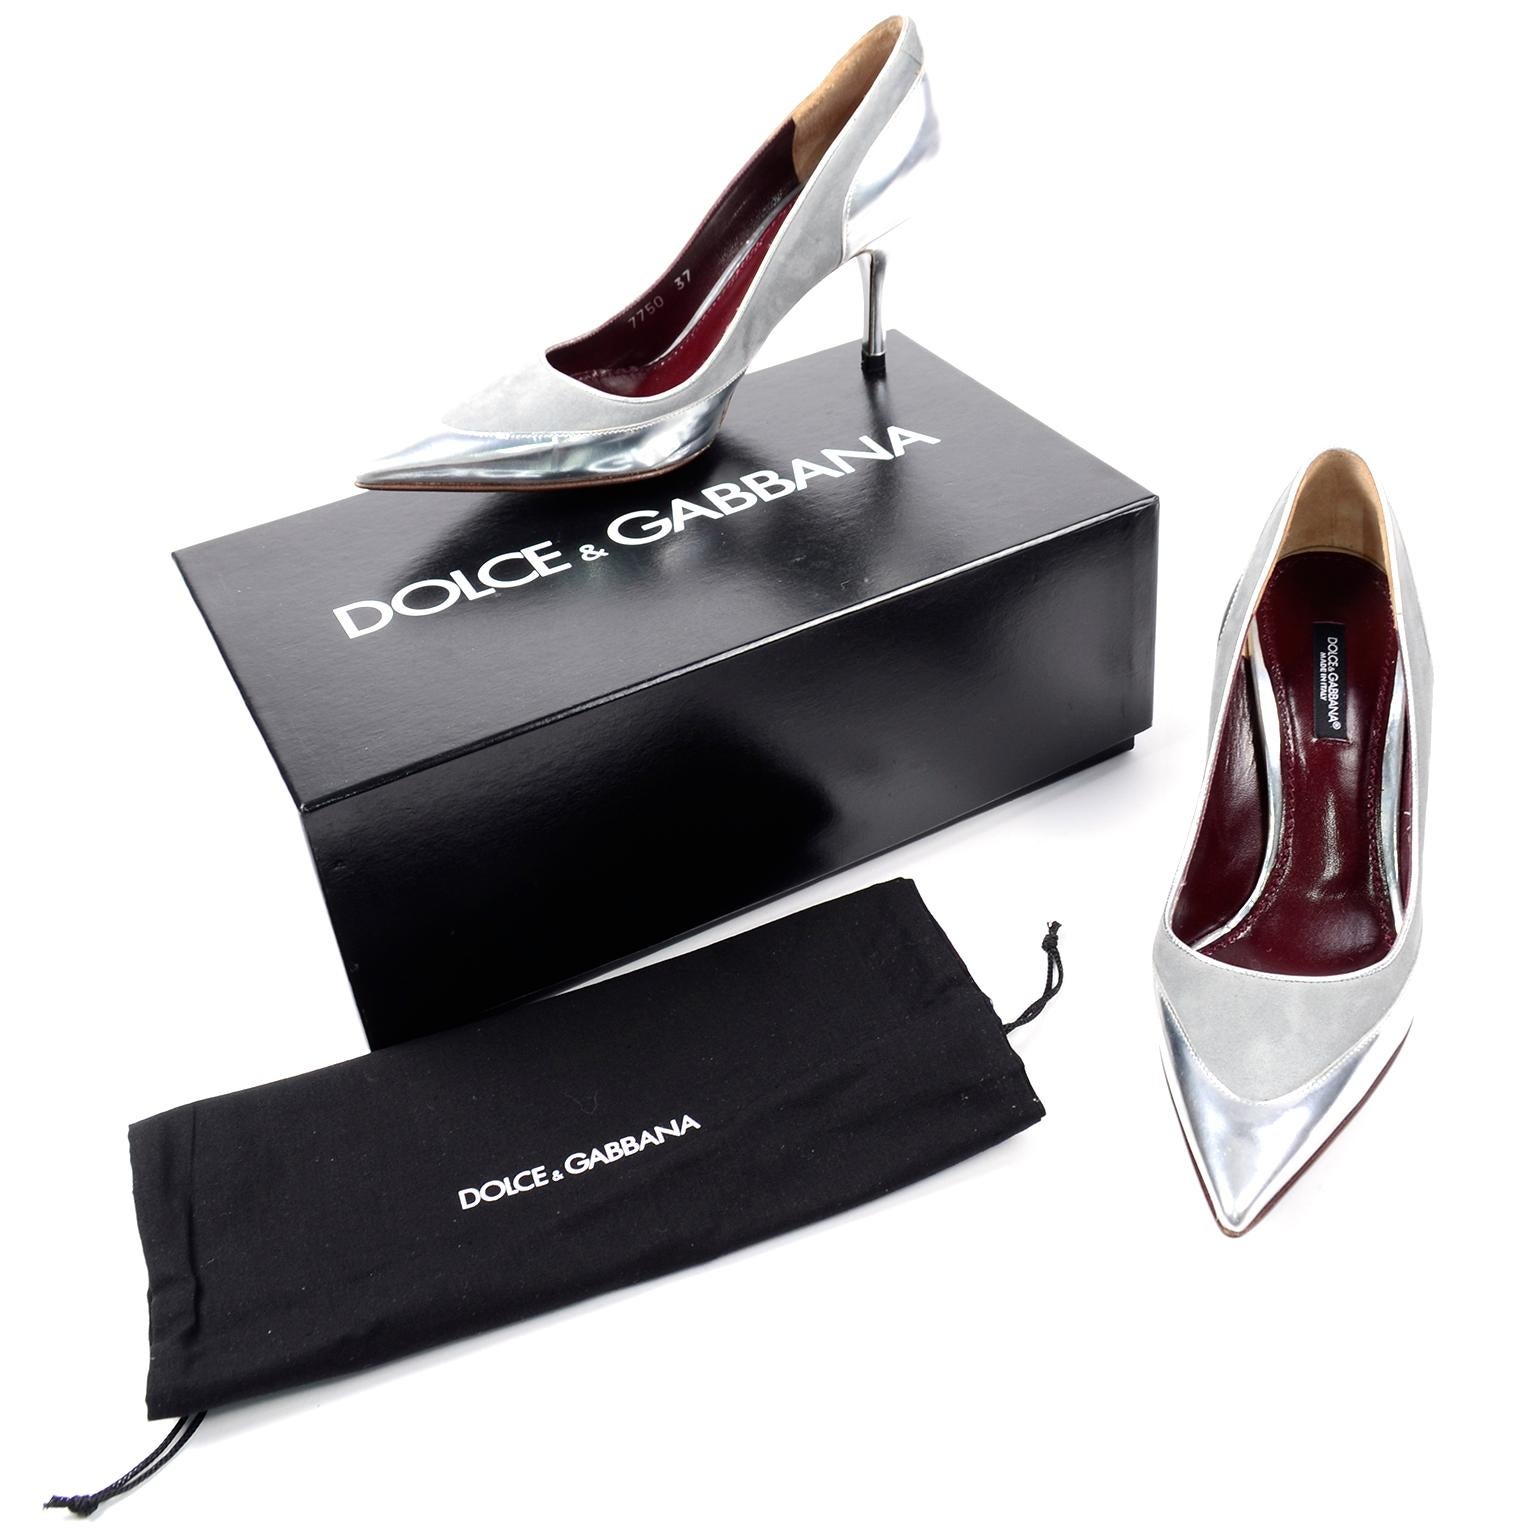 This is a beautiful pair of Dolce & Gabbana silver heels made of both a shiny silver leather and a grey suede with pointed toes and spiked heels.
Marked a size 37, purchased at Saks Fifth Avenue and the description reads; Decollete Cachemire +